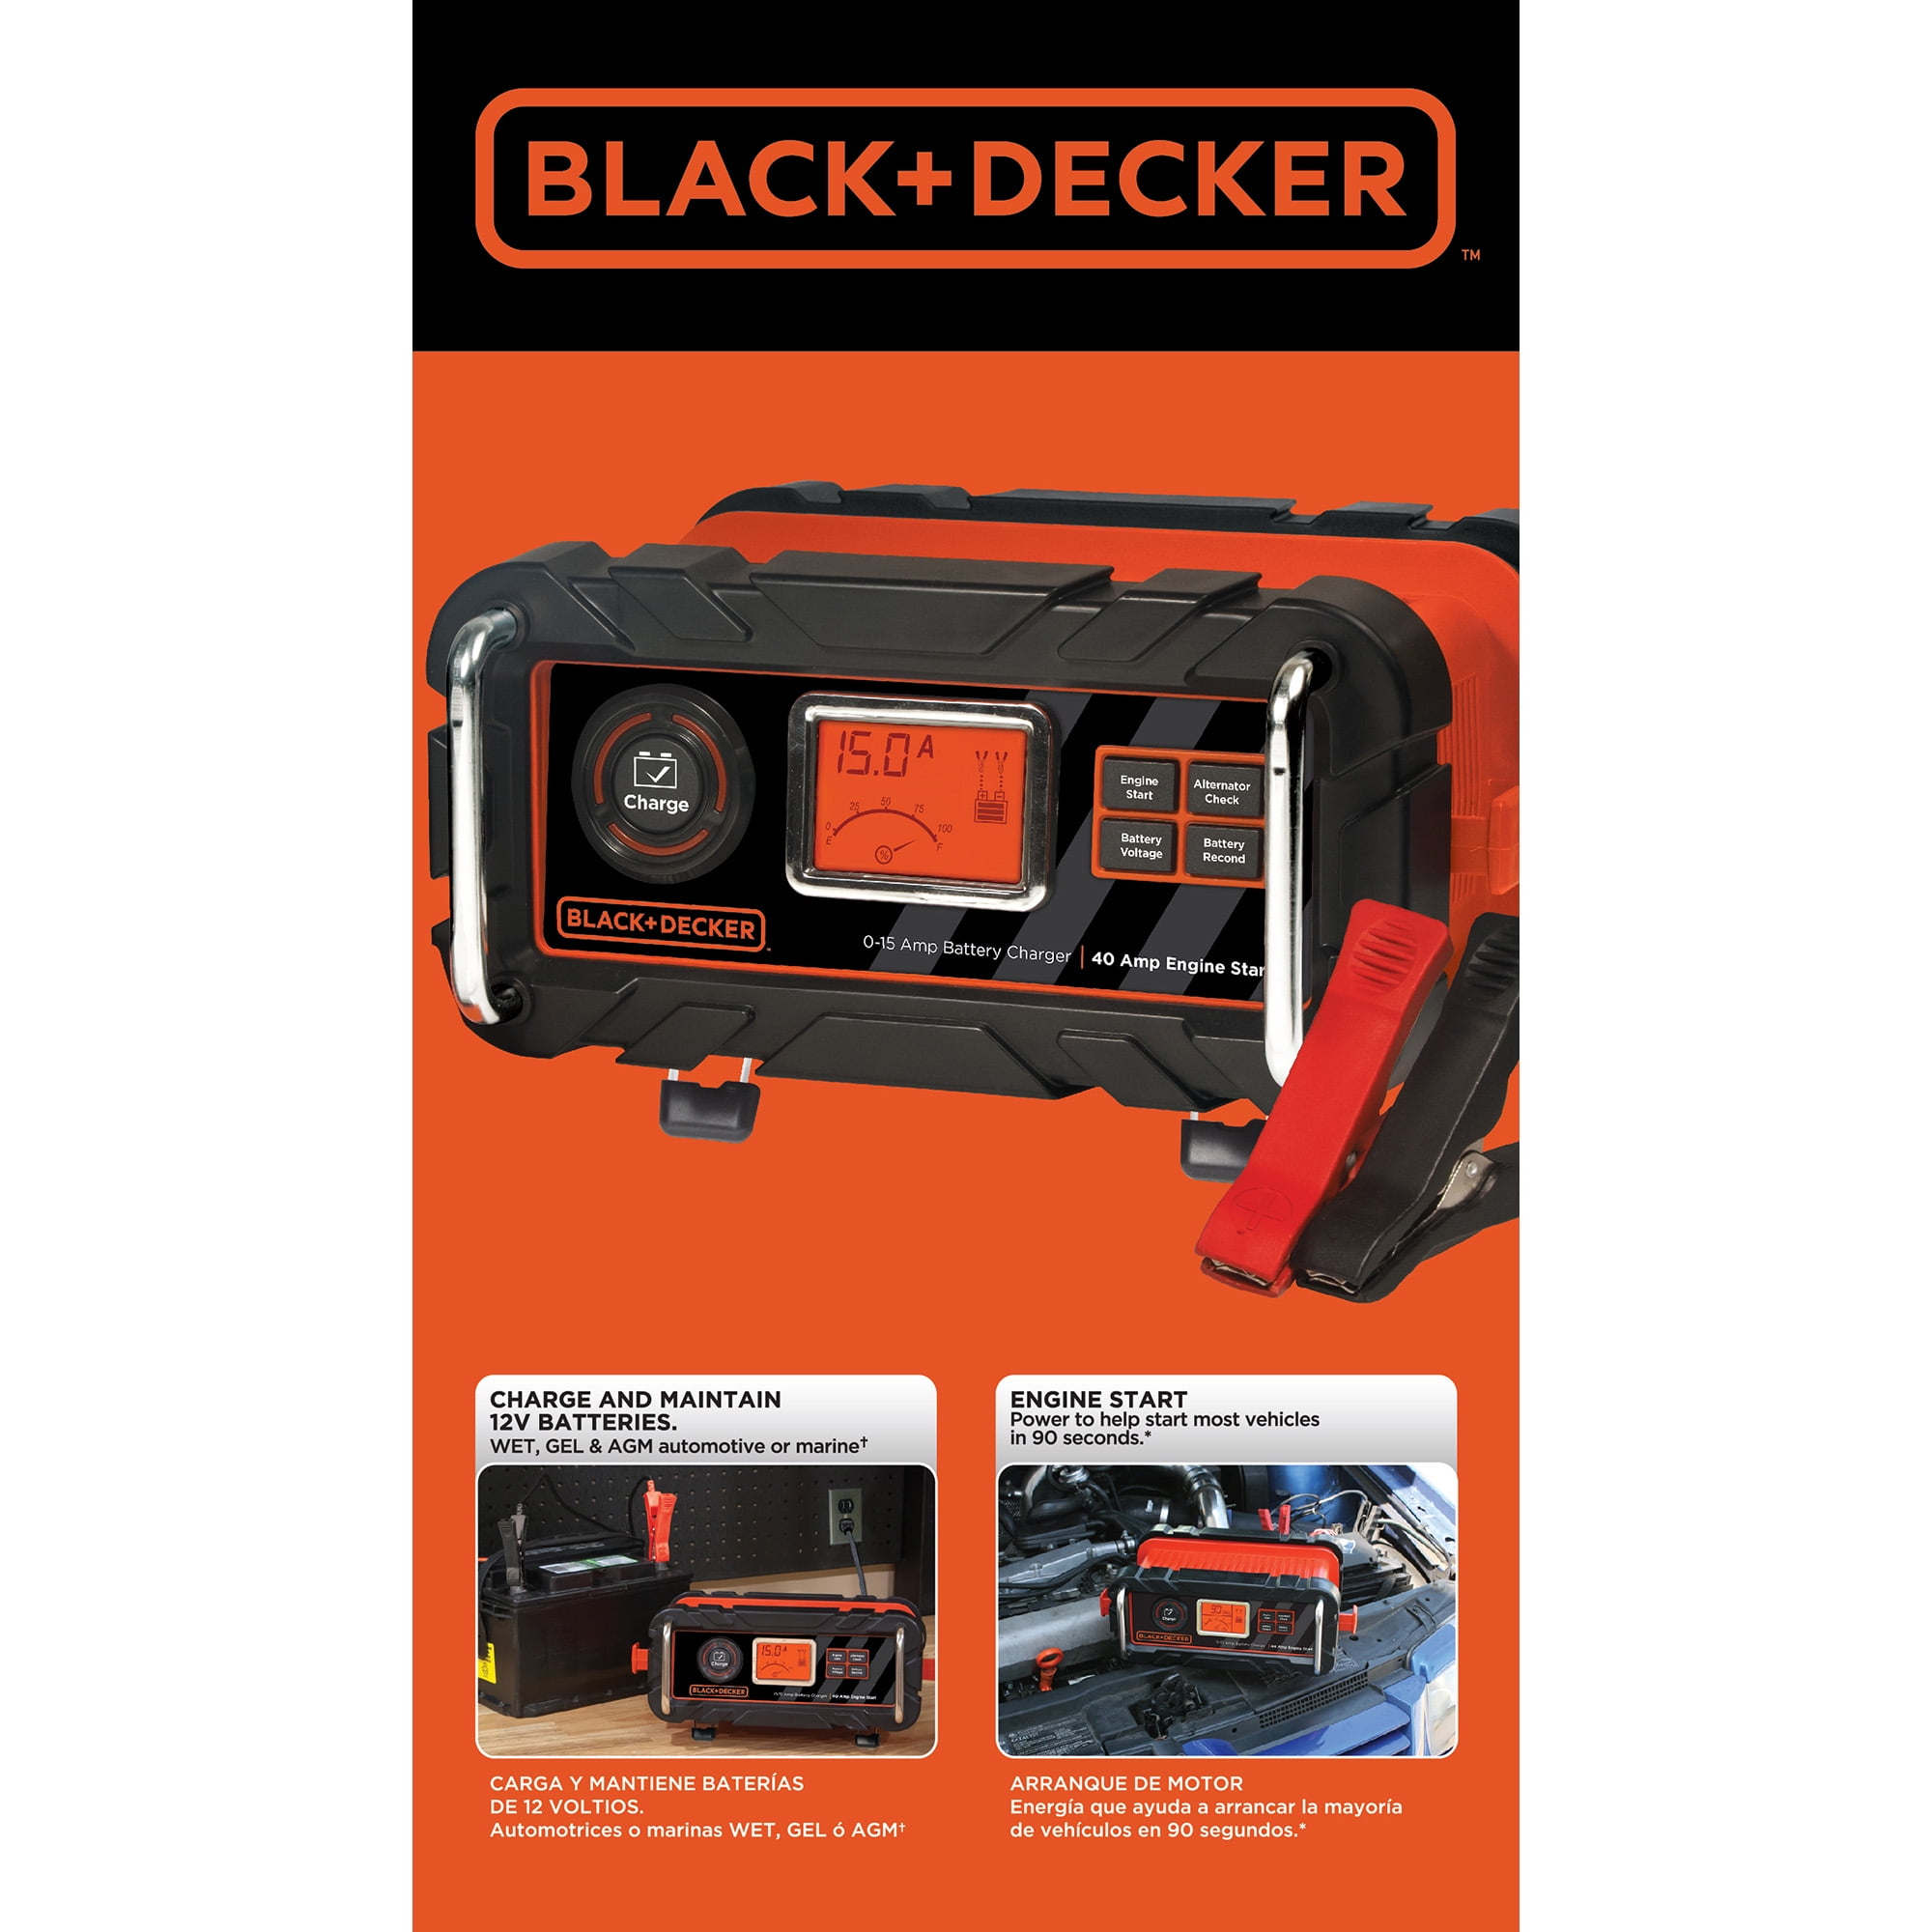 BLACK+DECKER's automatic 15A/12V bench battery charger hits $36 (Reg. $60)